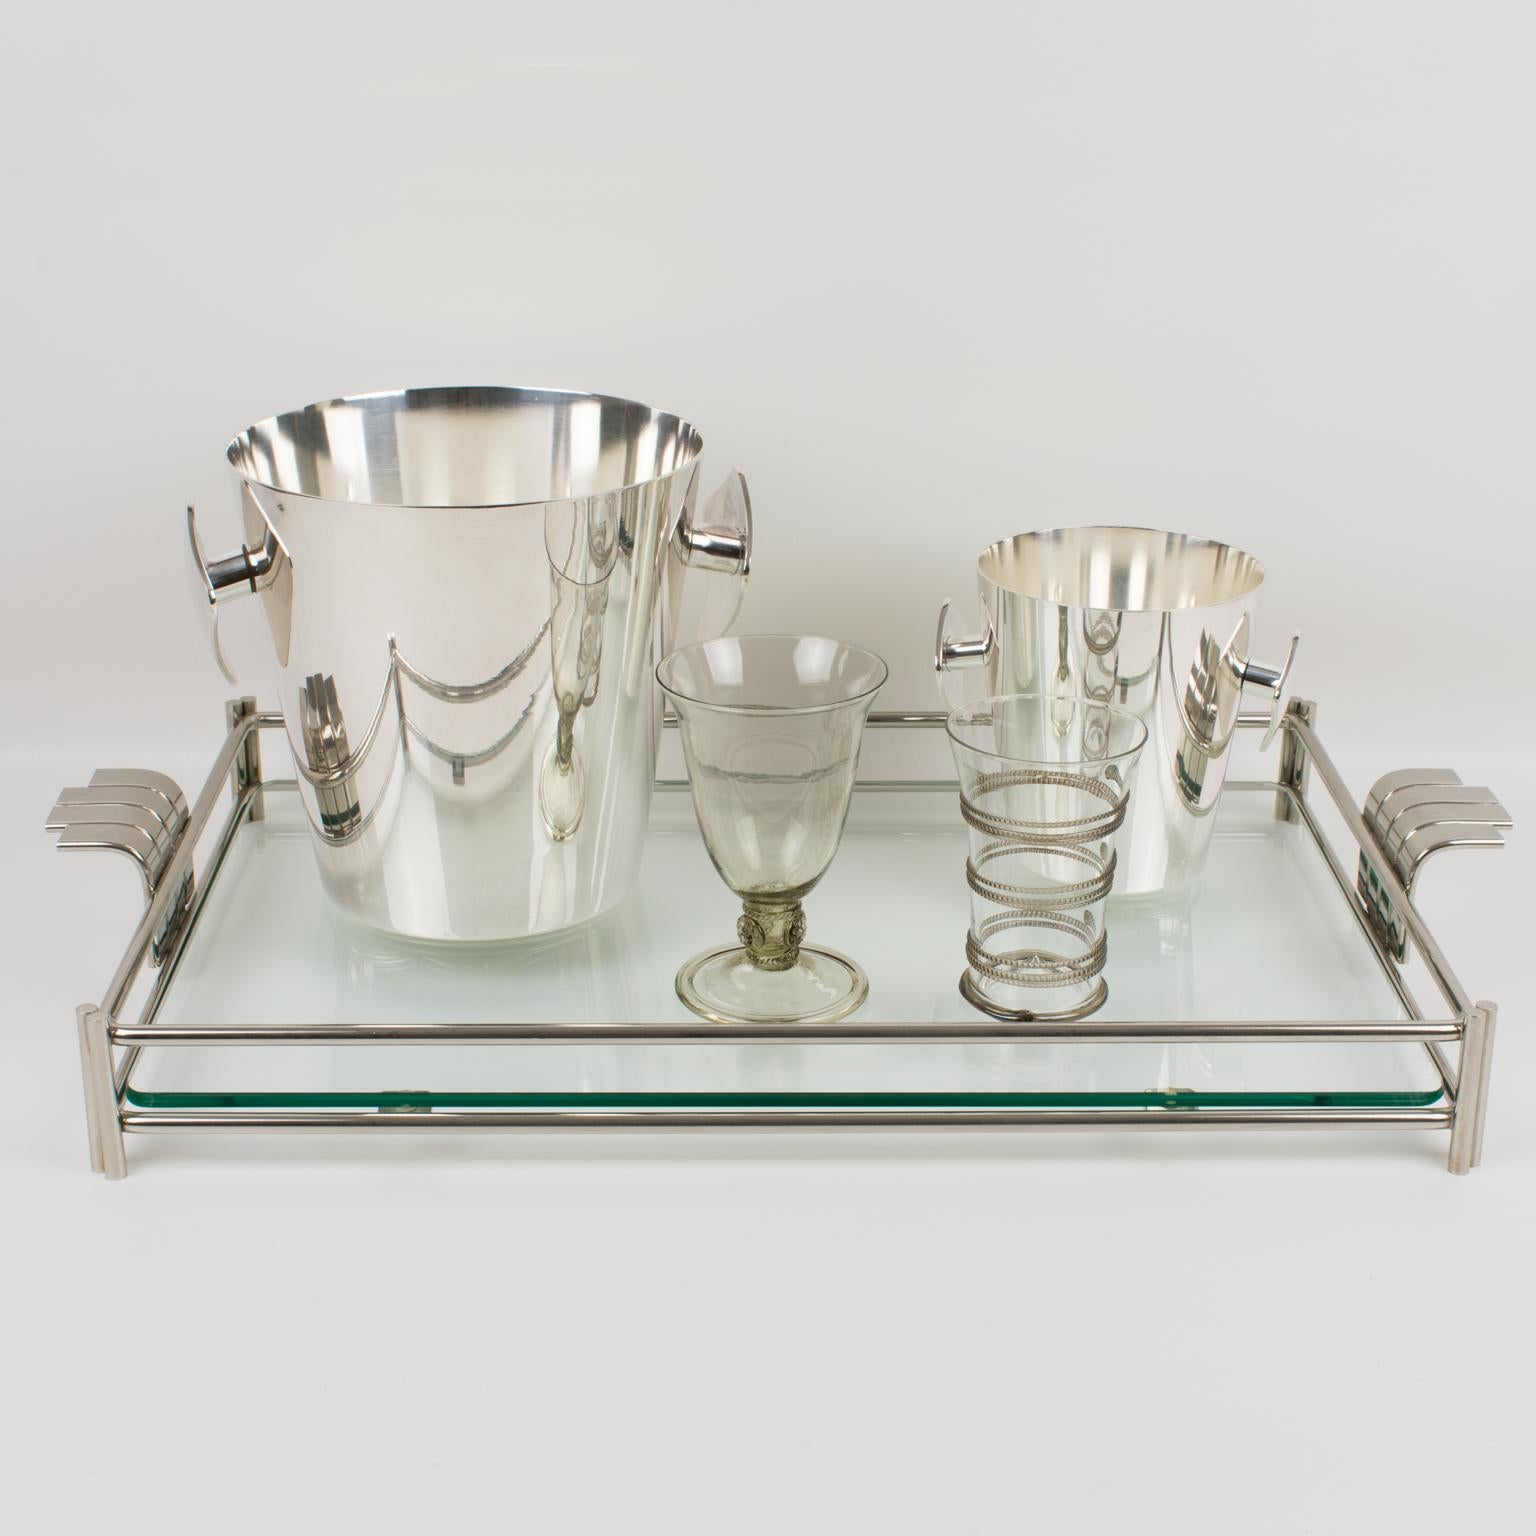 Sophisticated 1980s modernist barware serving tray platter designed for Christian Dior Home Collection. Large rectangular butler shape builds with silvered metal framing and thick glass slab insert. Elegant raised handles on the sides. The engraved